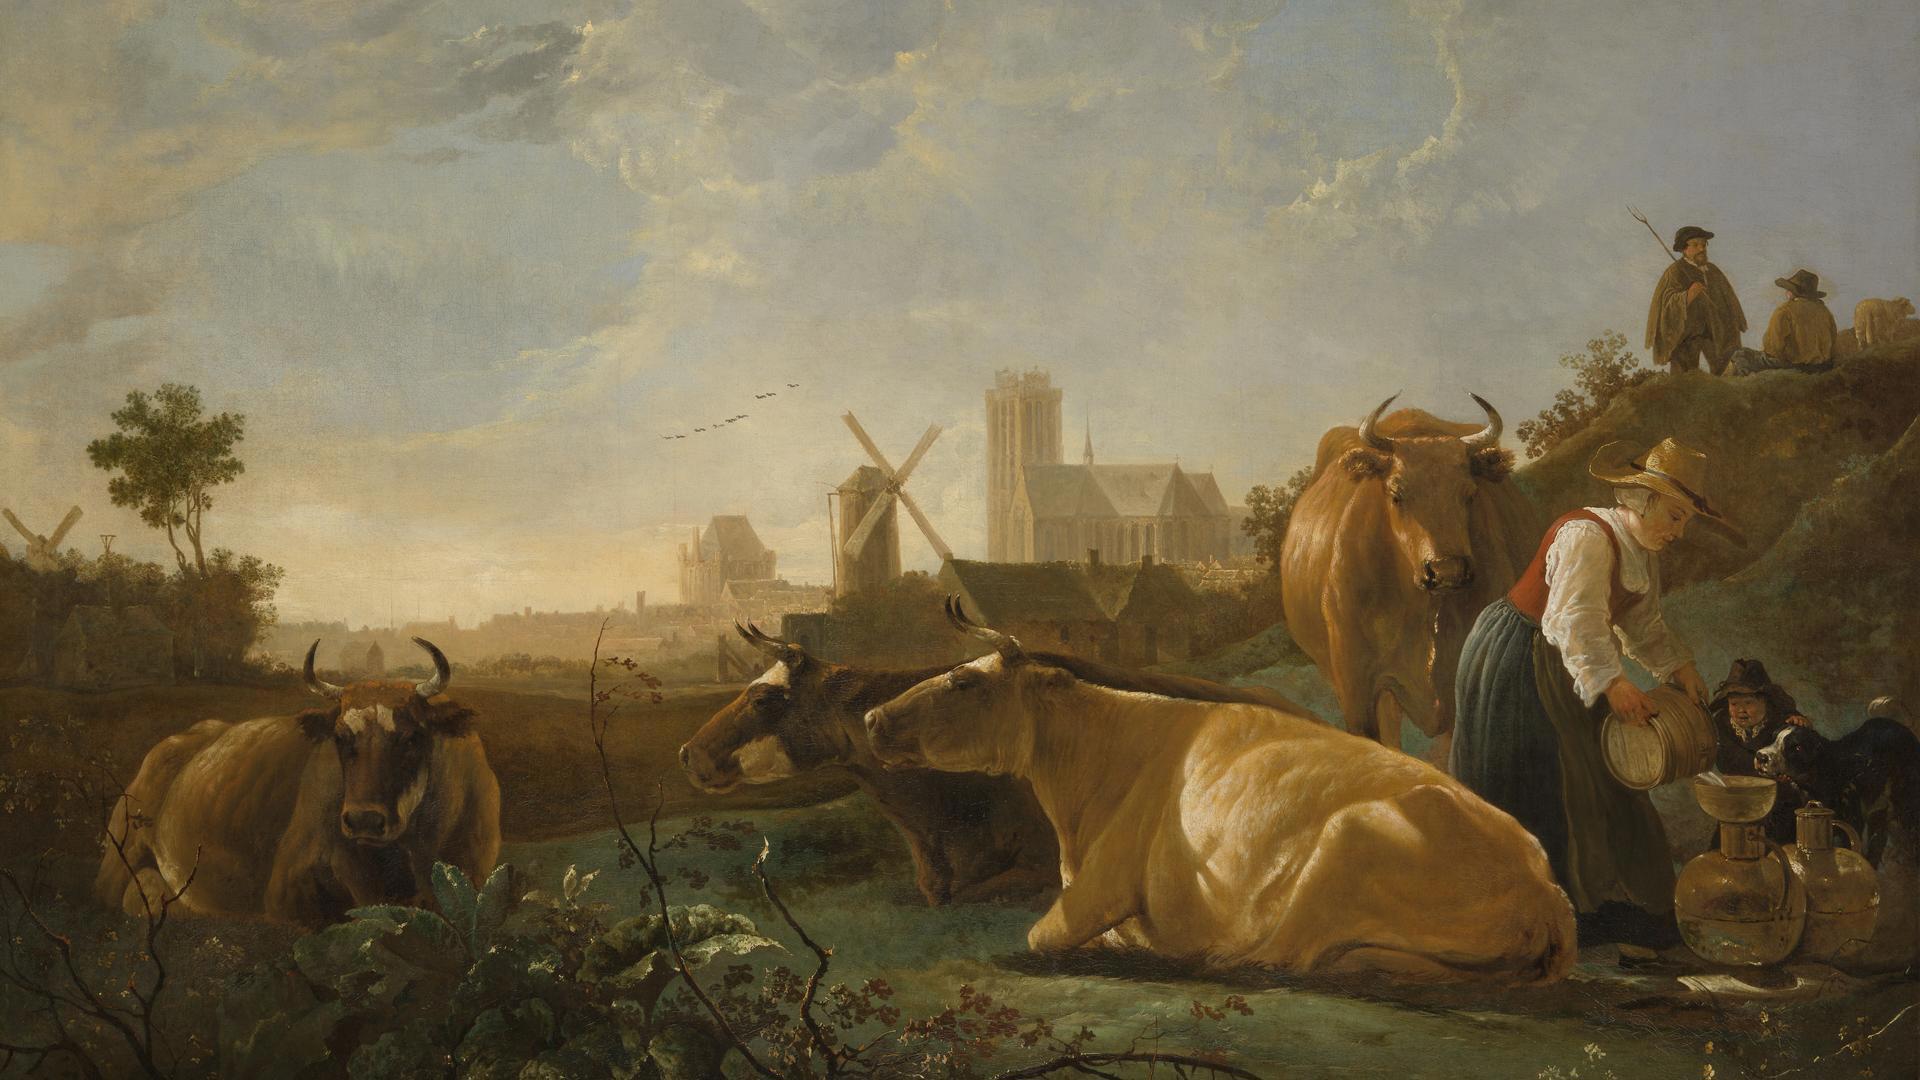 The Large Dort by Aelbert Cuyp